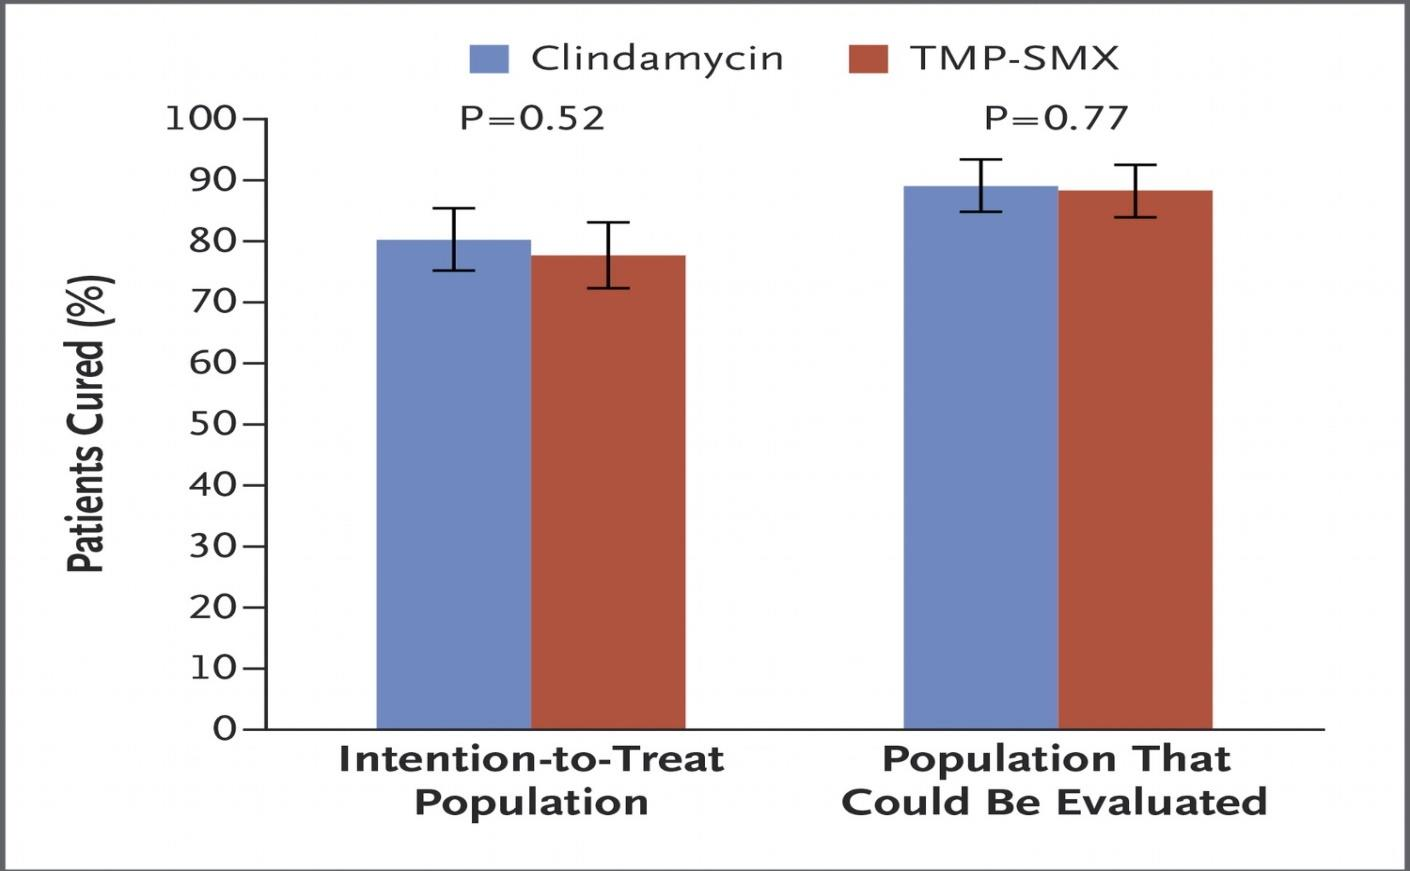 Comparison of the Efficacy of Clindamycin and TMP-SMX in Patients with Uncomplicated Skin Infection Comparison of the